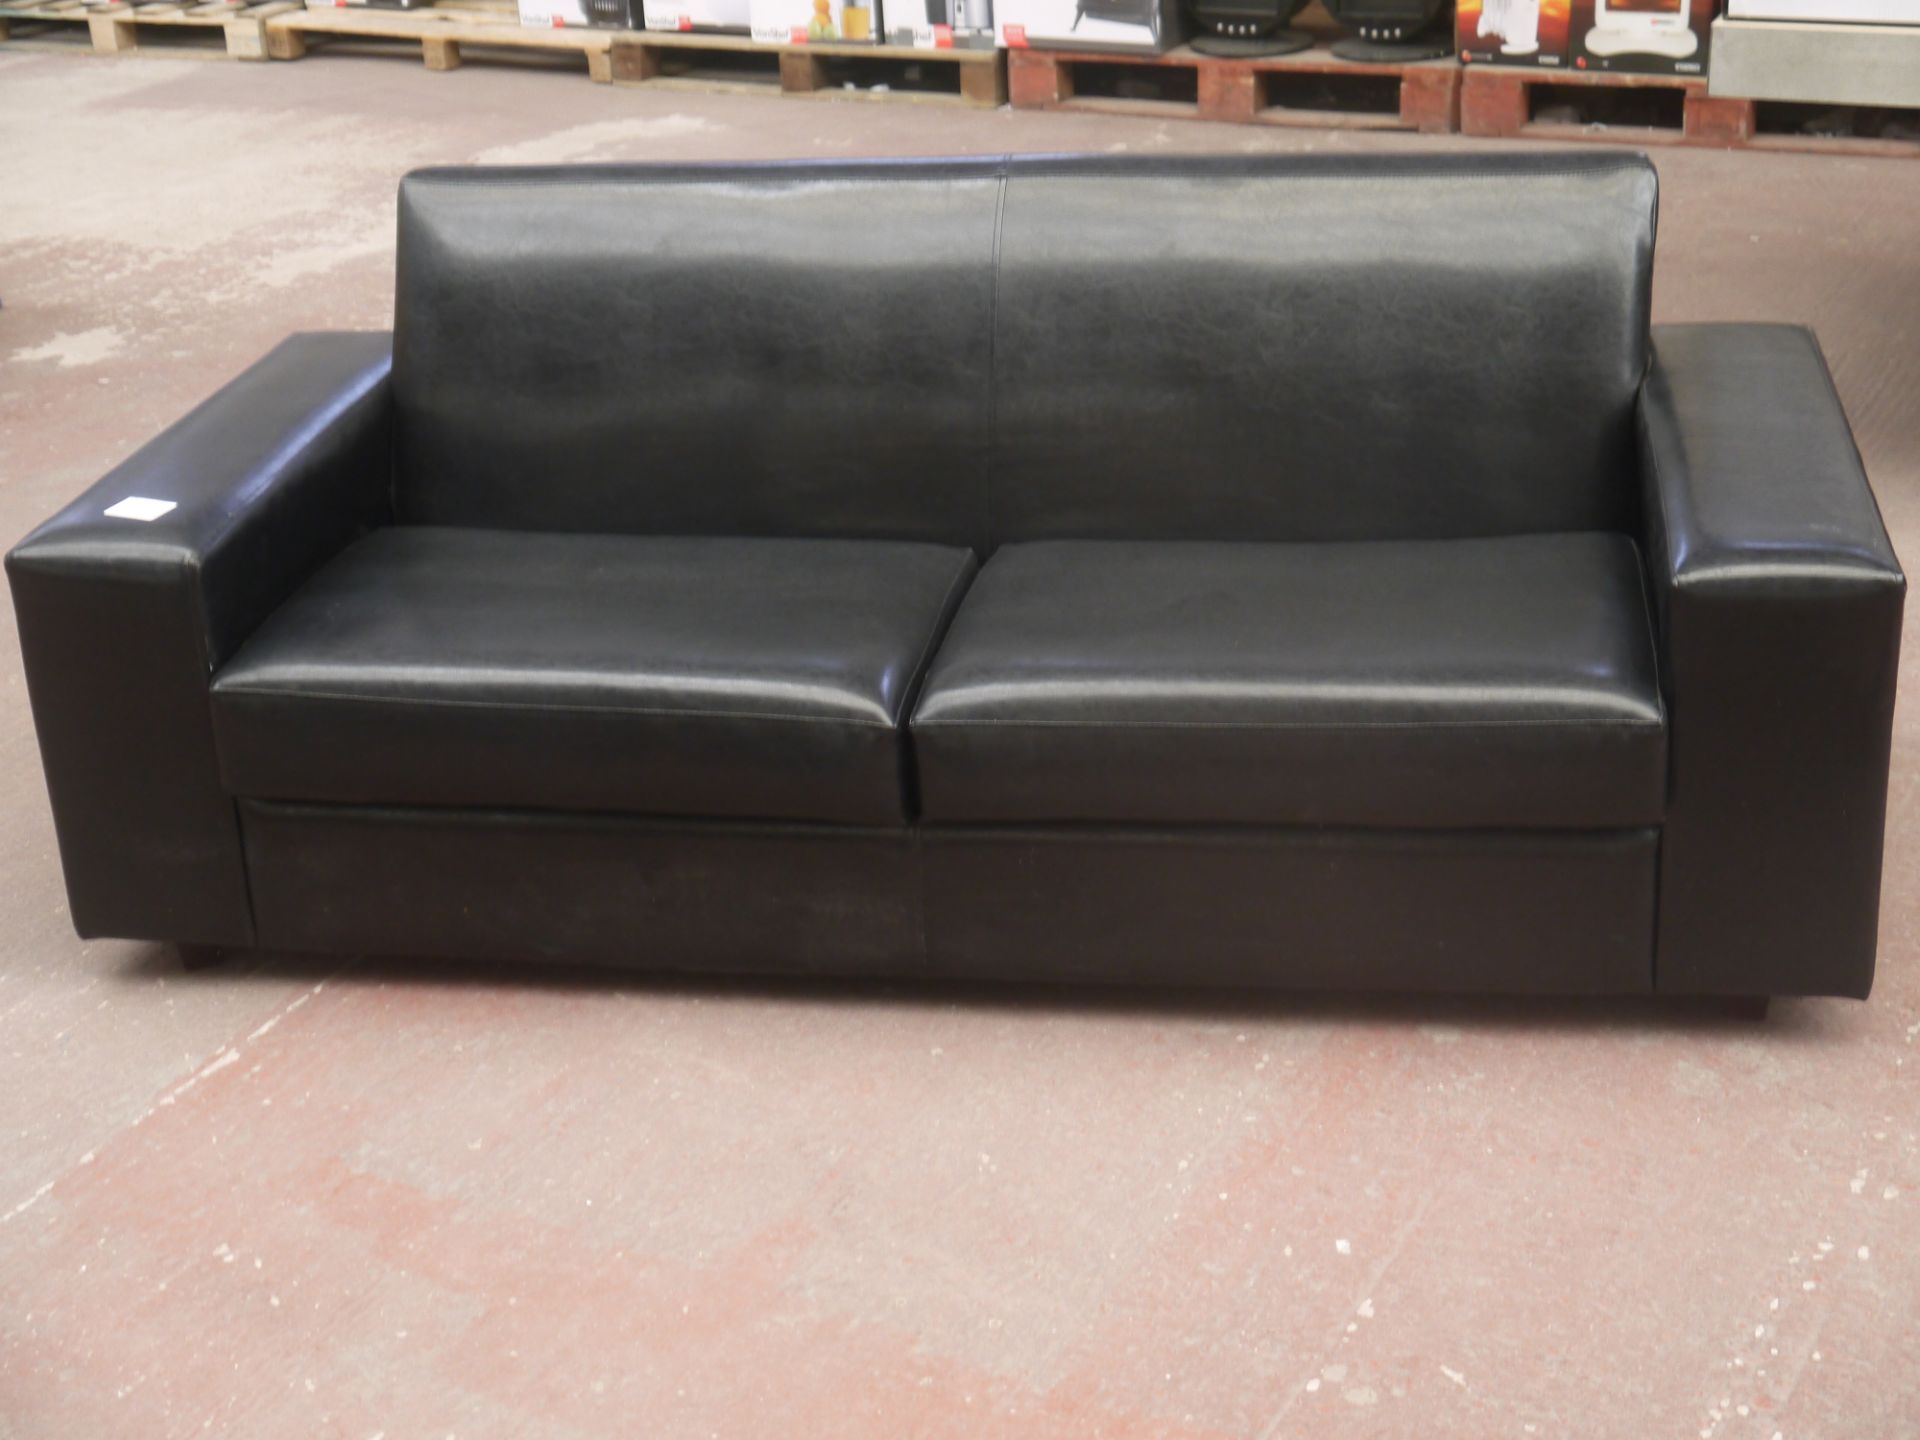 Black leather sofa in good condition measures 195cm long and 84 cm wide